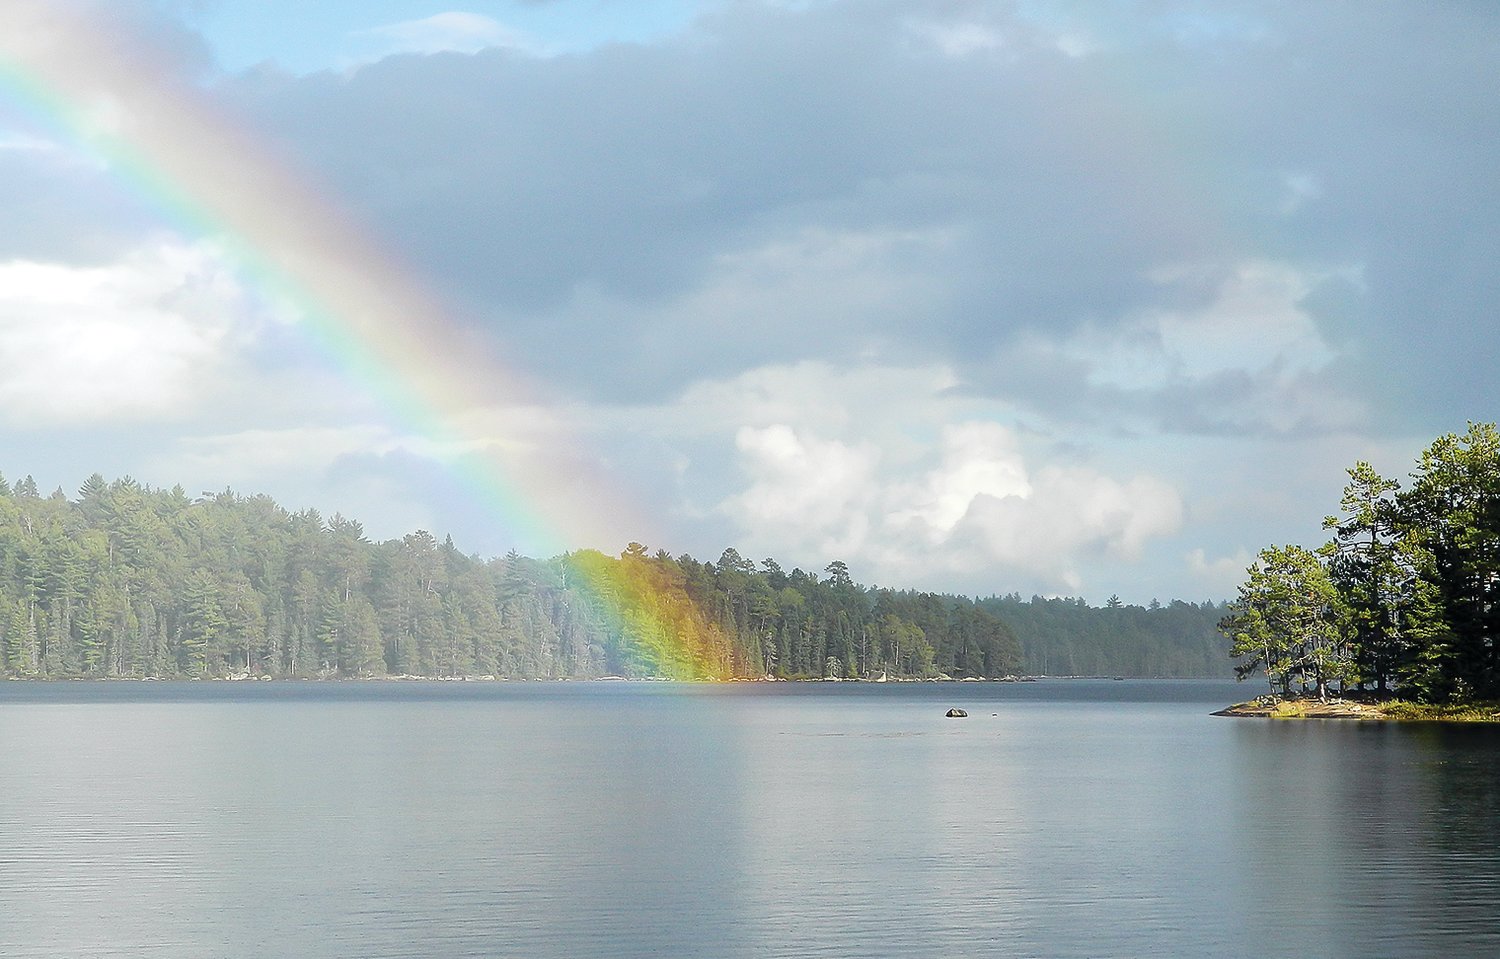 A rainbow appears to dip into the clear waters of Big Moose Lake in the Boundary Waters Canoe Area Wilderness. Fewer visitors may have access to Big Moose and the more than 1,000 other lakes in the 1.1-million acre wilderness as a result of entry permit reductions planned for 2022.